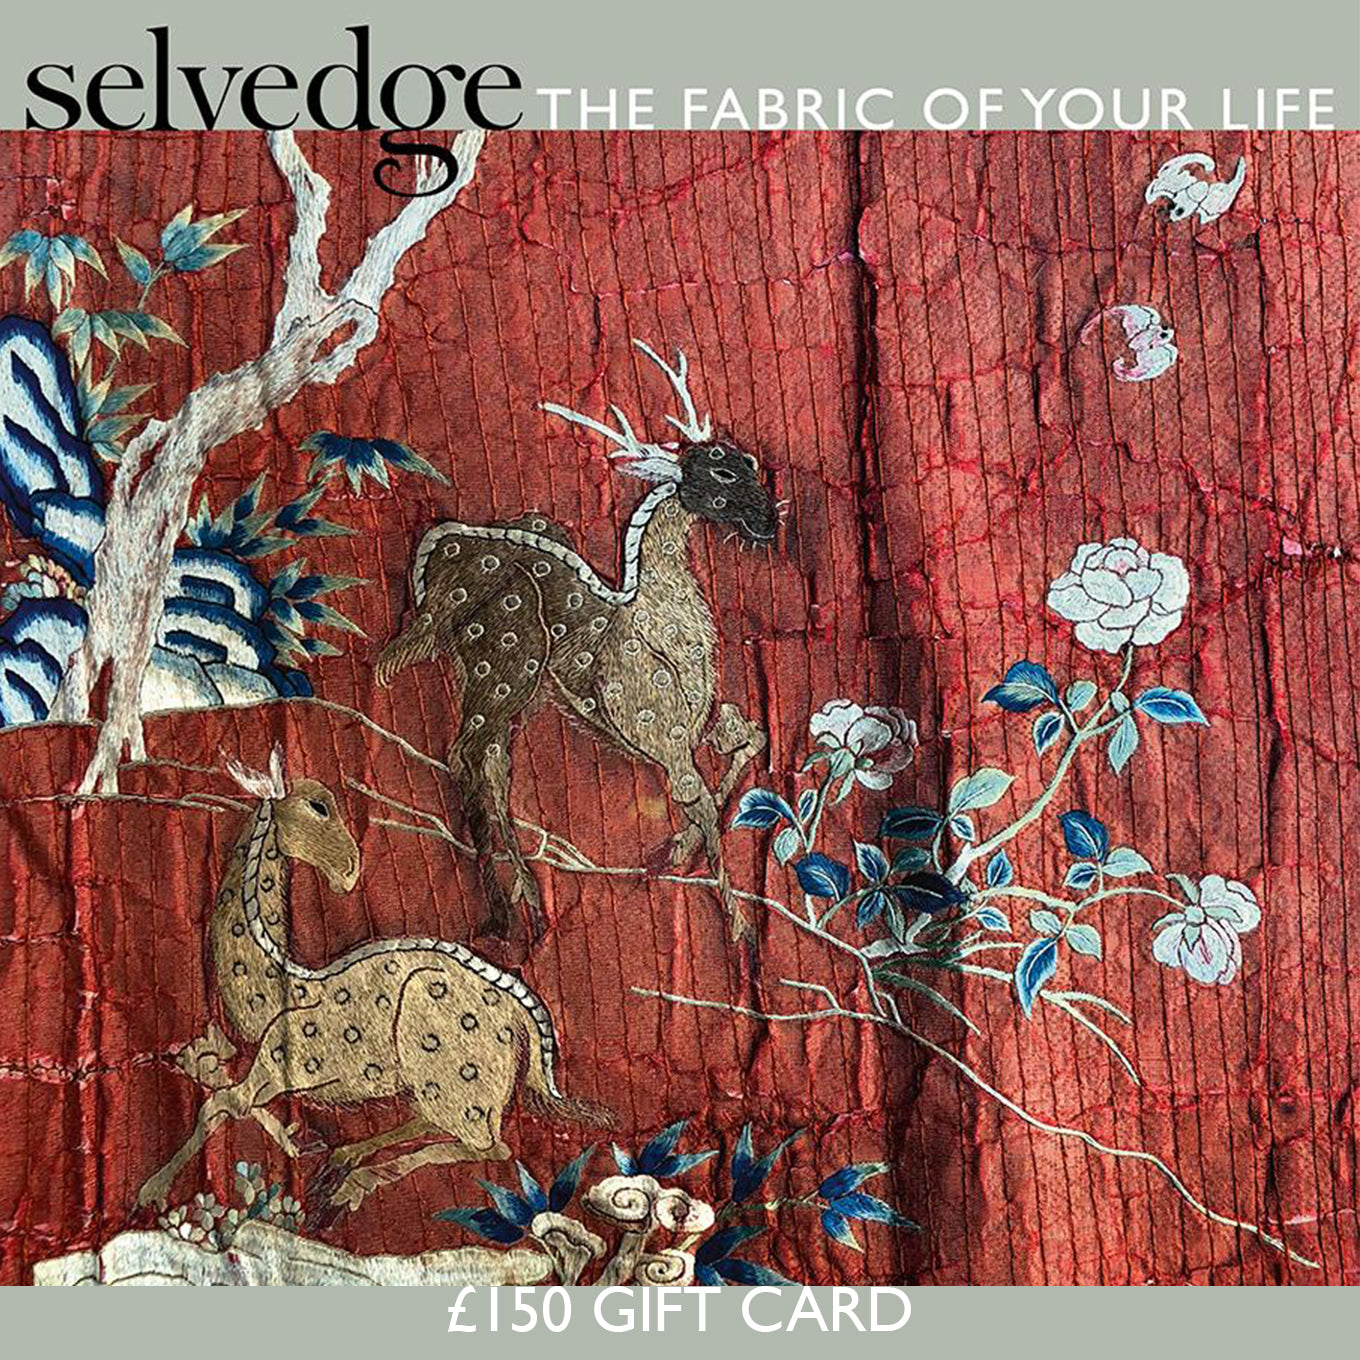 The Selvedge Gift Card